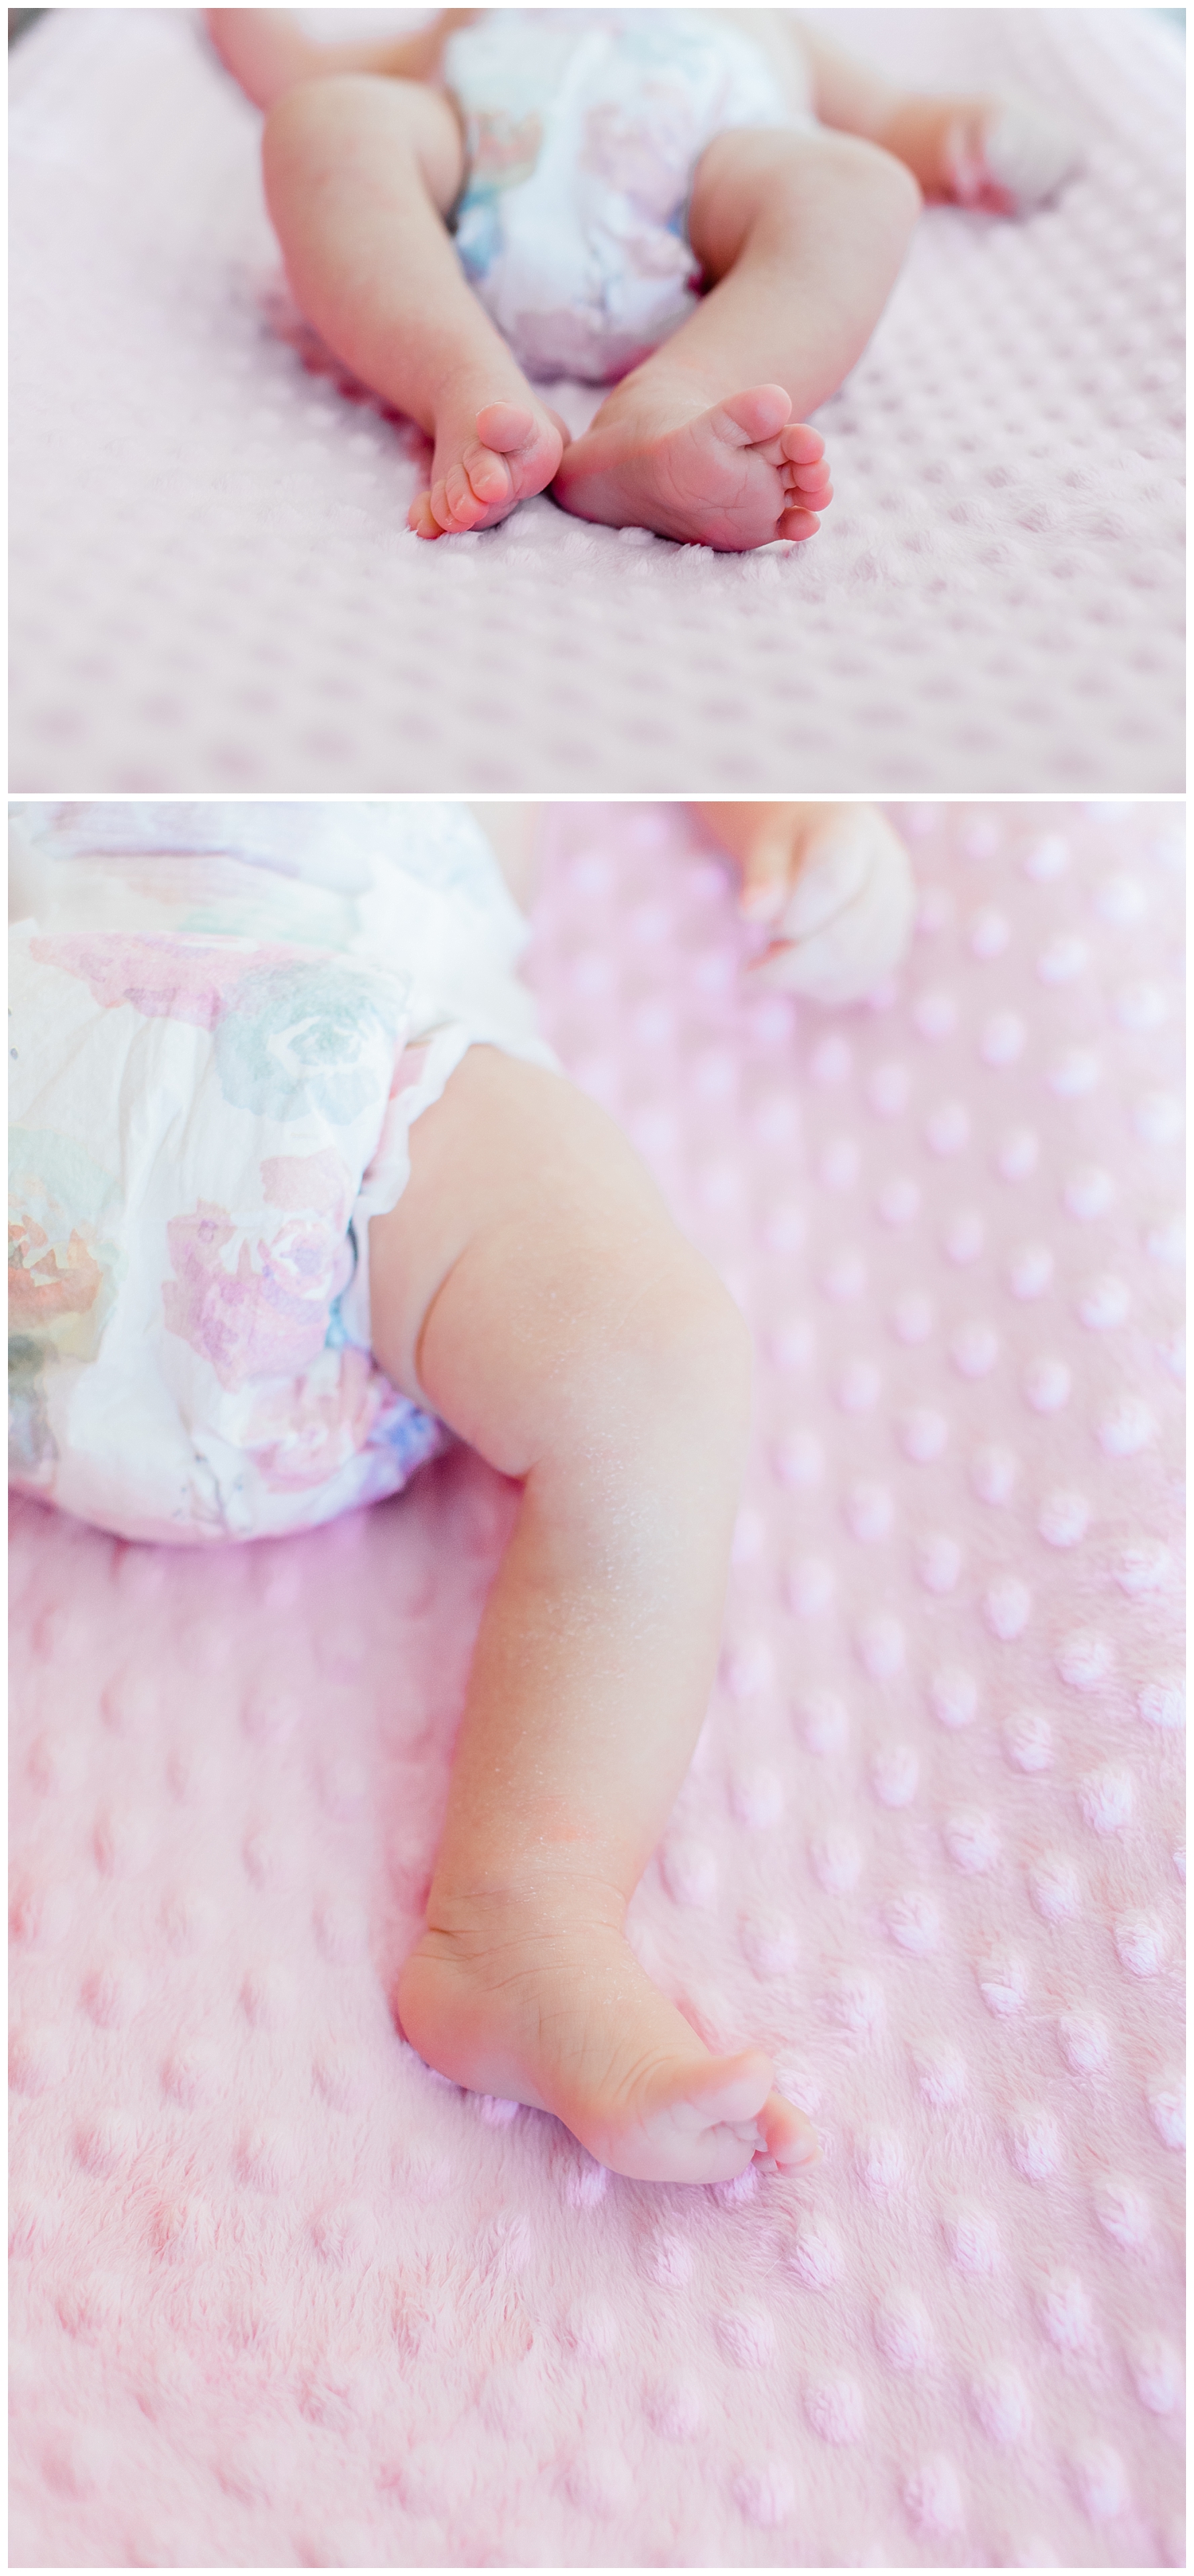 Baby toes at lifestyle newborn session, with Halie Olszowy (based in Portsmouth, NH).